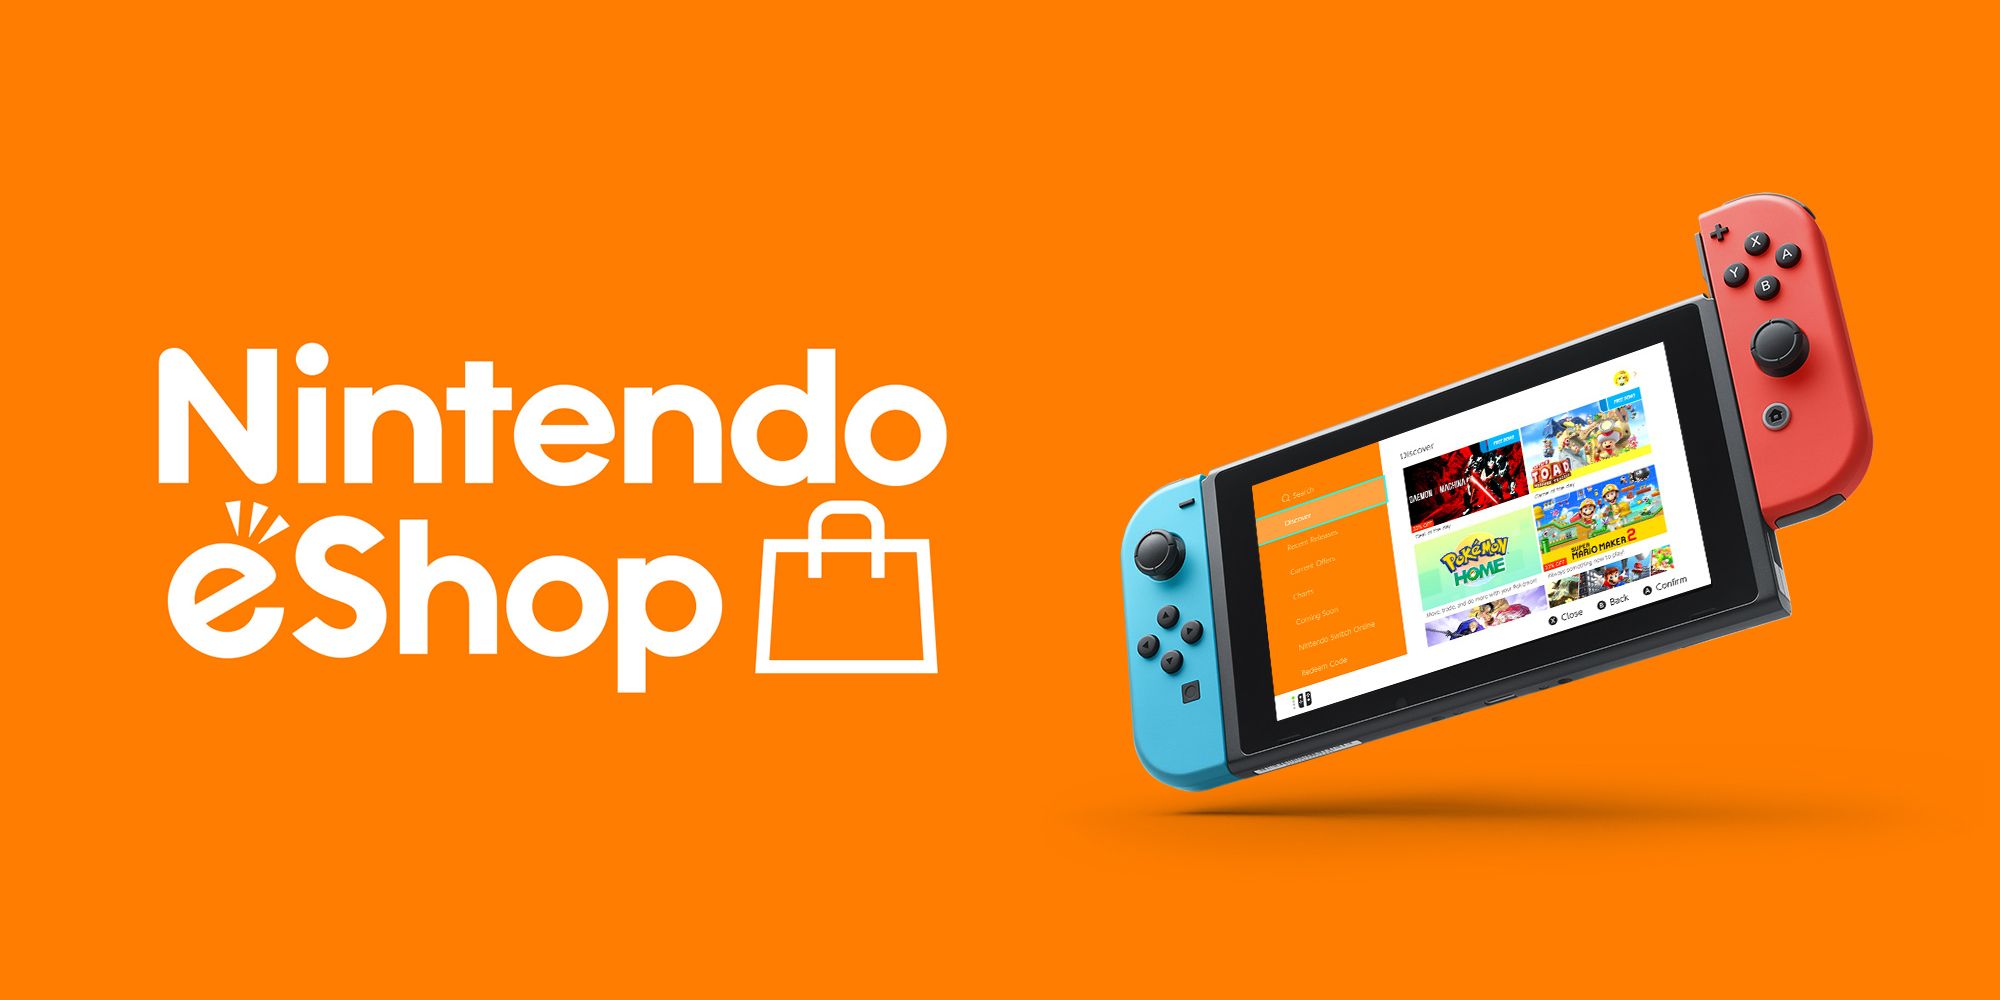 Nintendo eShop Is Now Available In Argentina, Colombia, Chile And